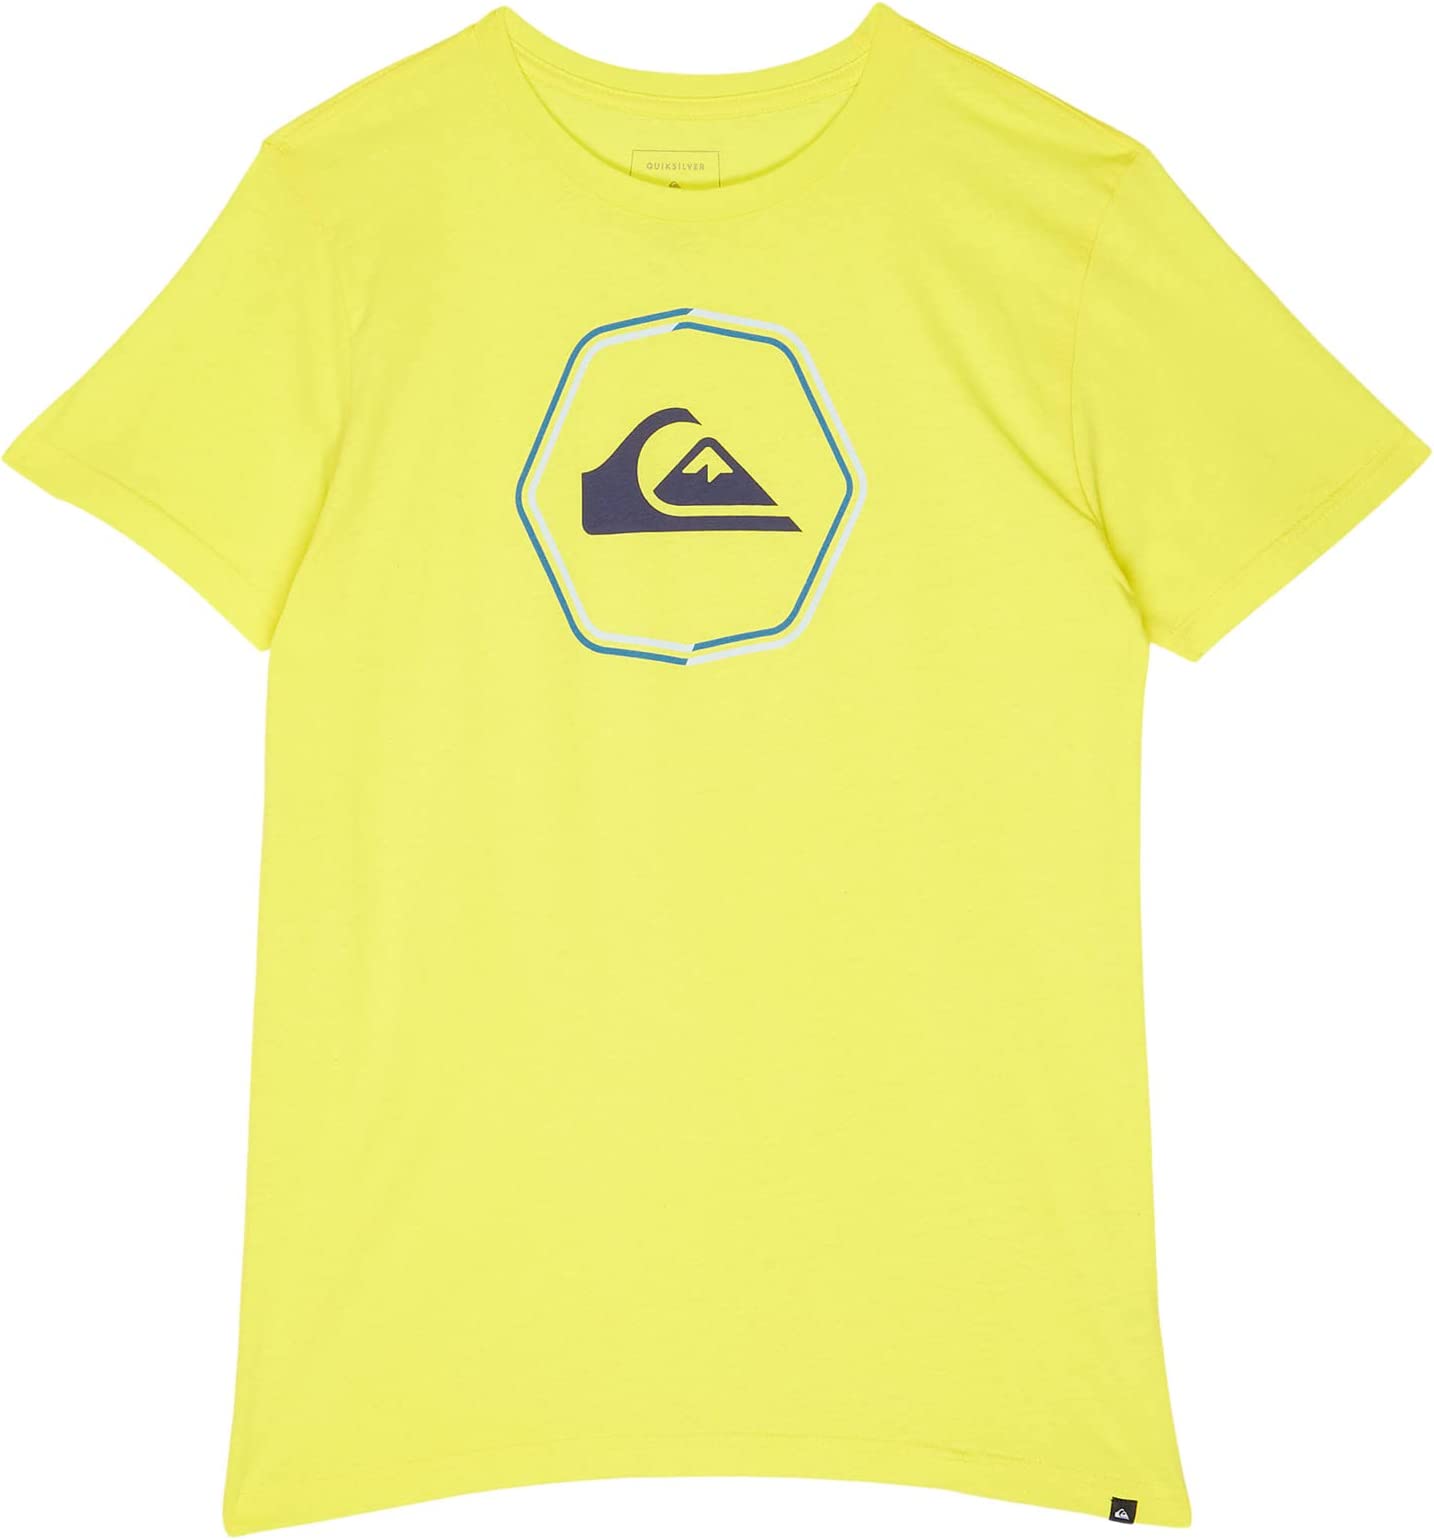 ○ Delivery Lines Tee Thin sale | Kids) Free Kids (Big quiksurfshop.com on Quiksilver